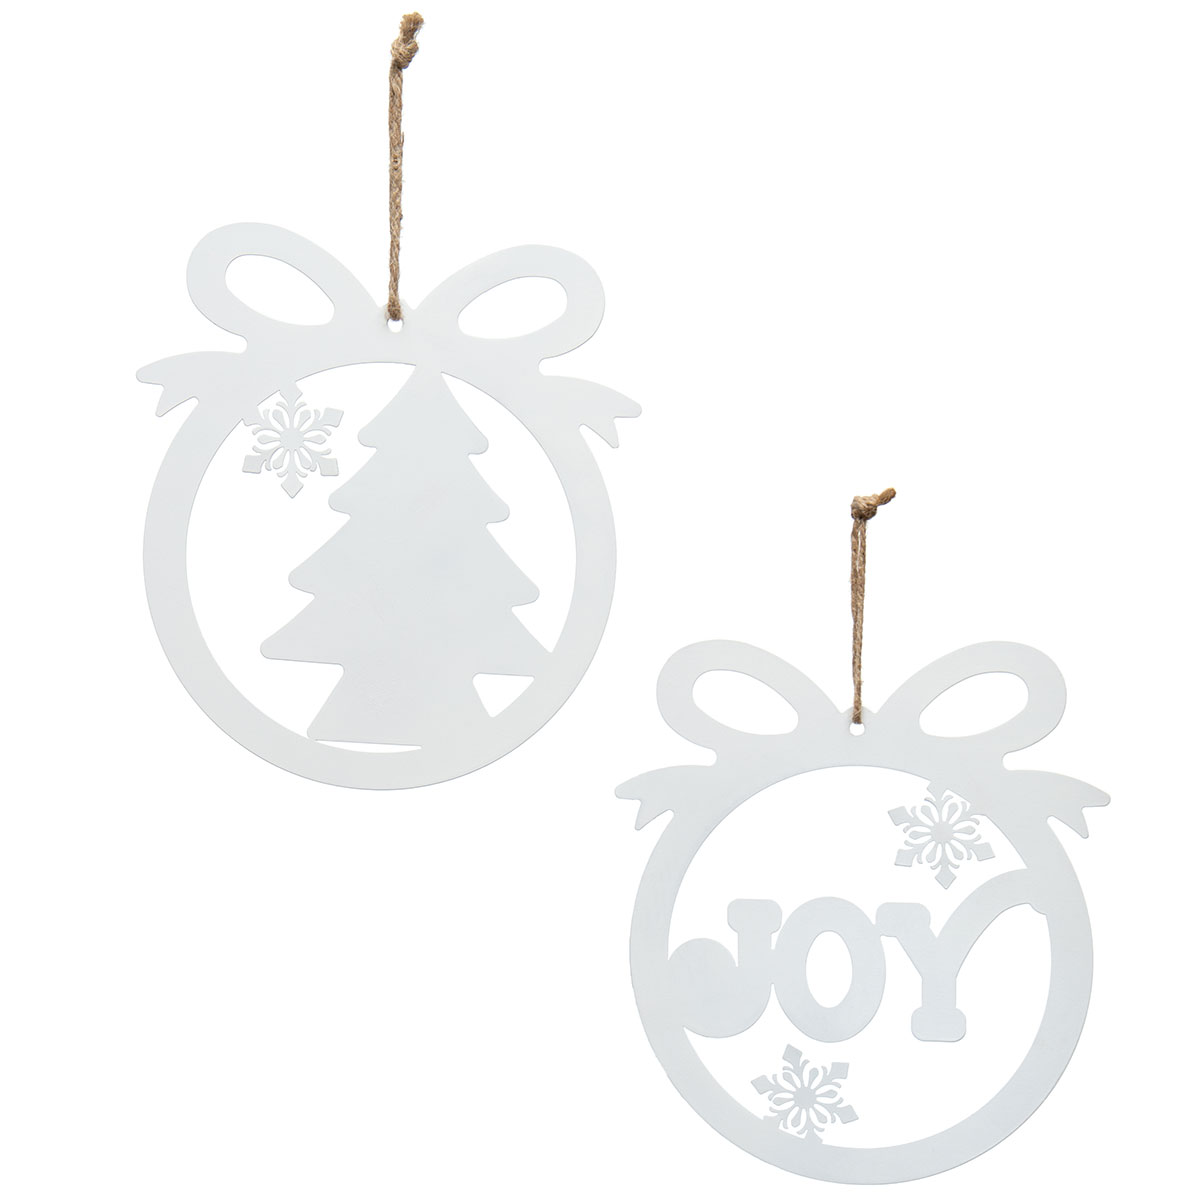 !WINTER BALL WITH BOW METAL FLAT ORNAMENT WHITE WITH f33